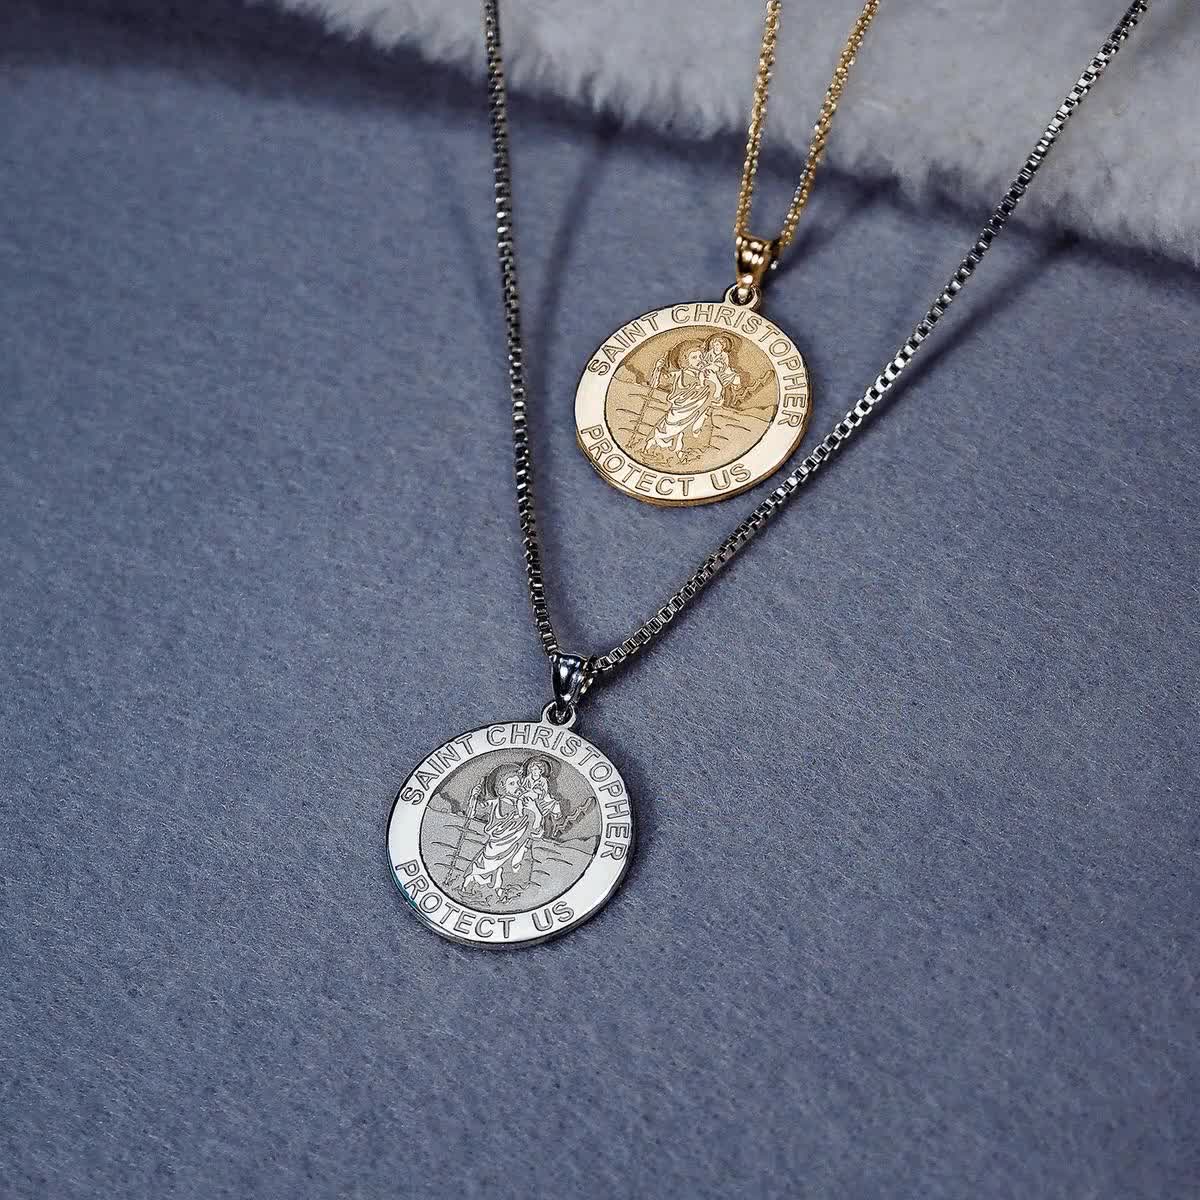 SAINT CHRISTOPHER MEDALLION Men's Necklace King Baby Silver Gold Alloy